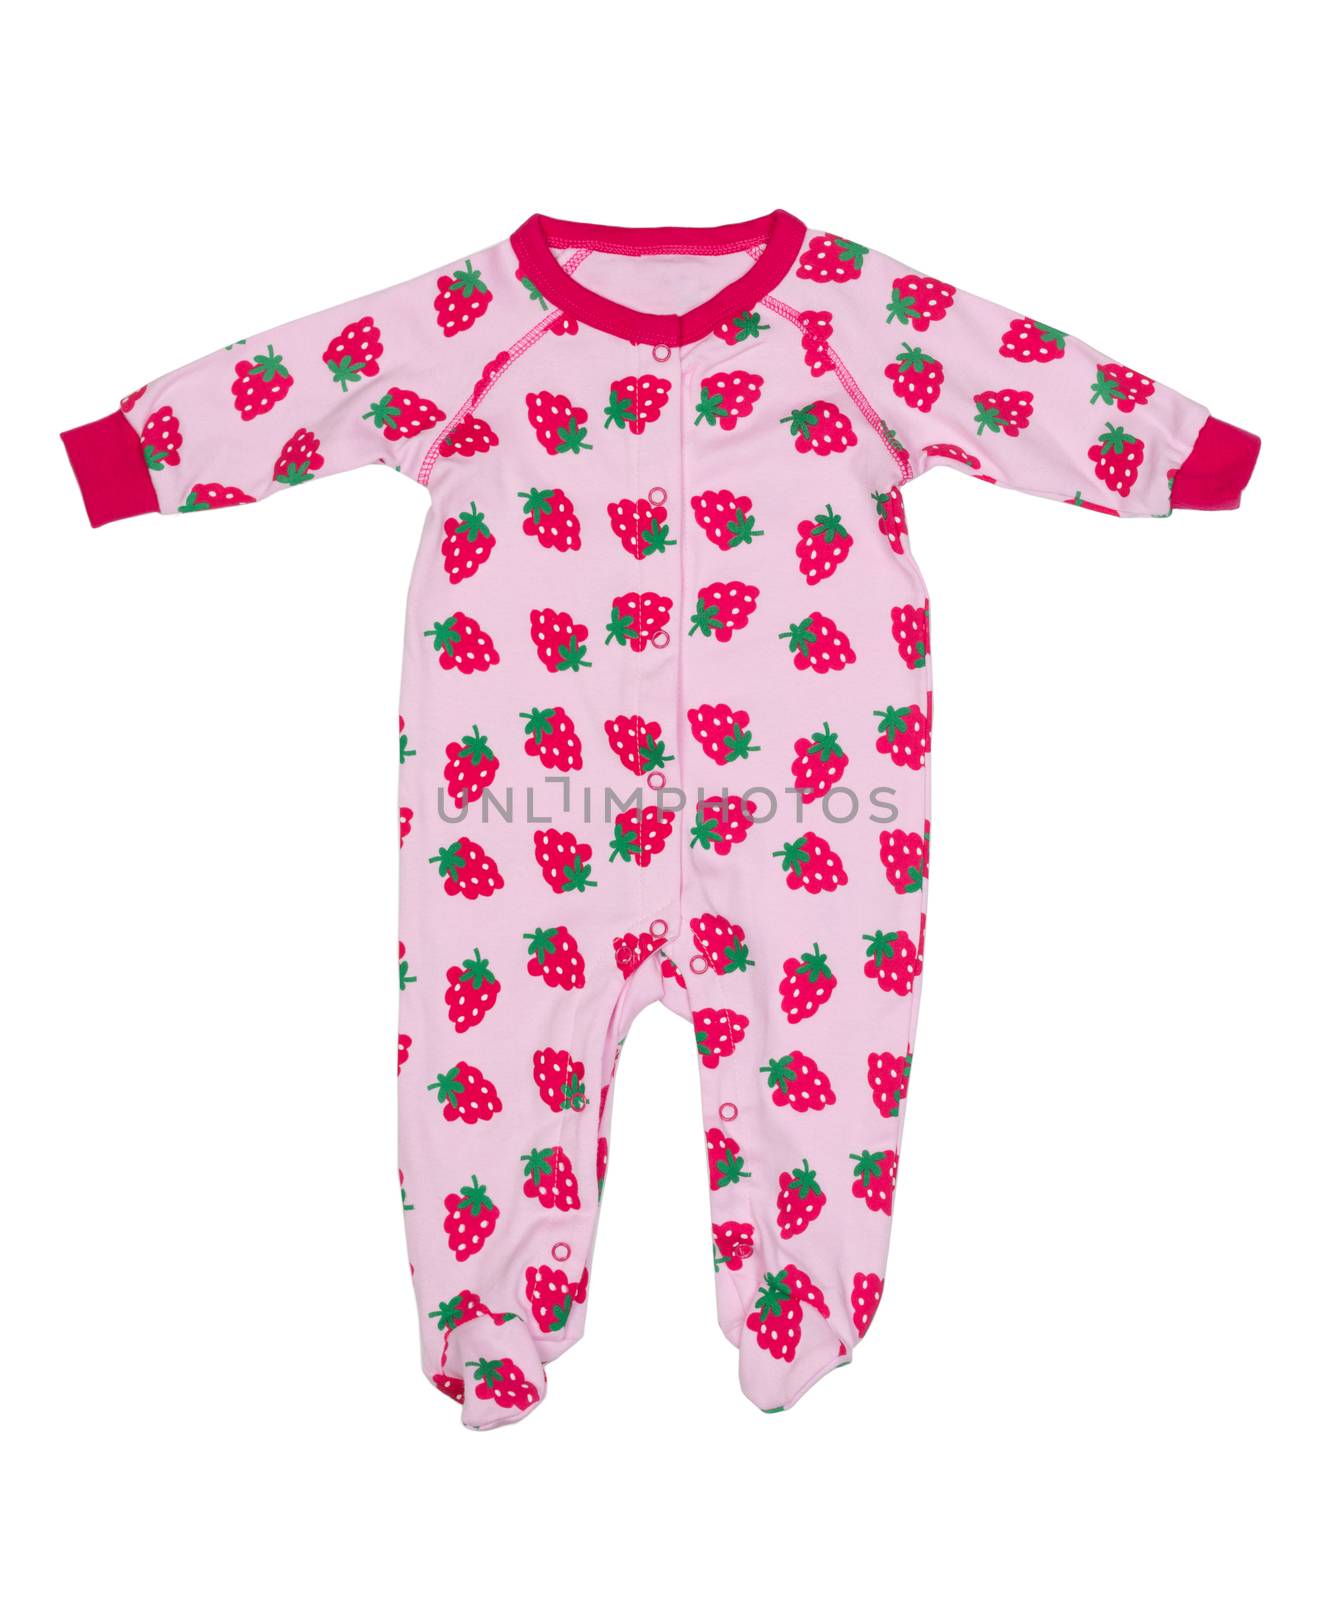 Clothing for newborns with strawberry pattern. Isolate on white.